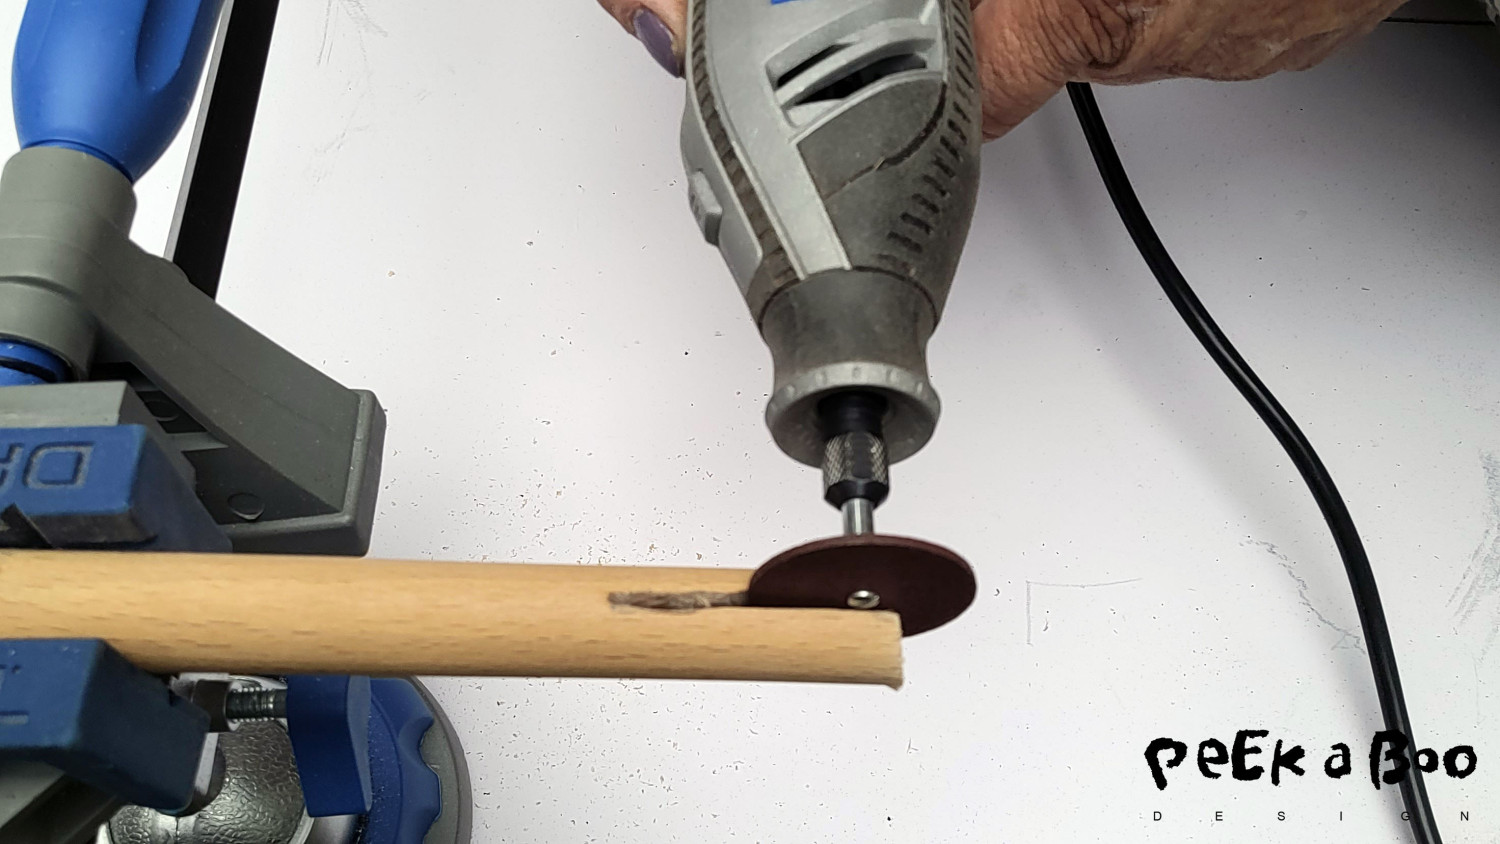 Use the EZ speed clic for sawing the slid, and afterwards use this sanding blade for finishing.